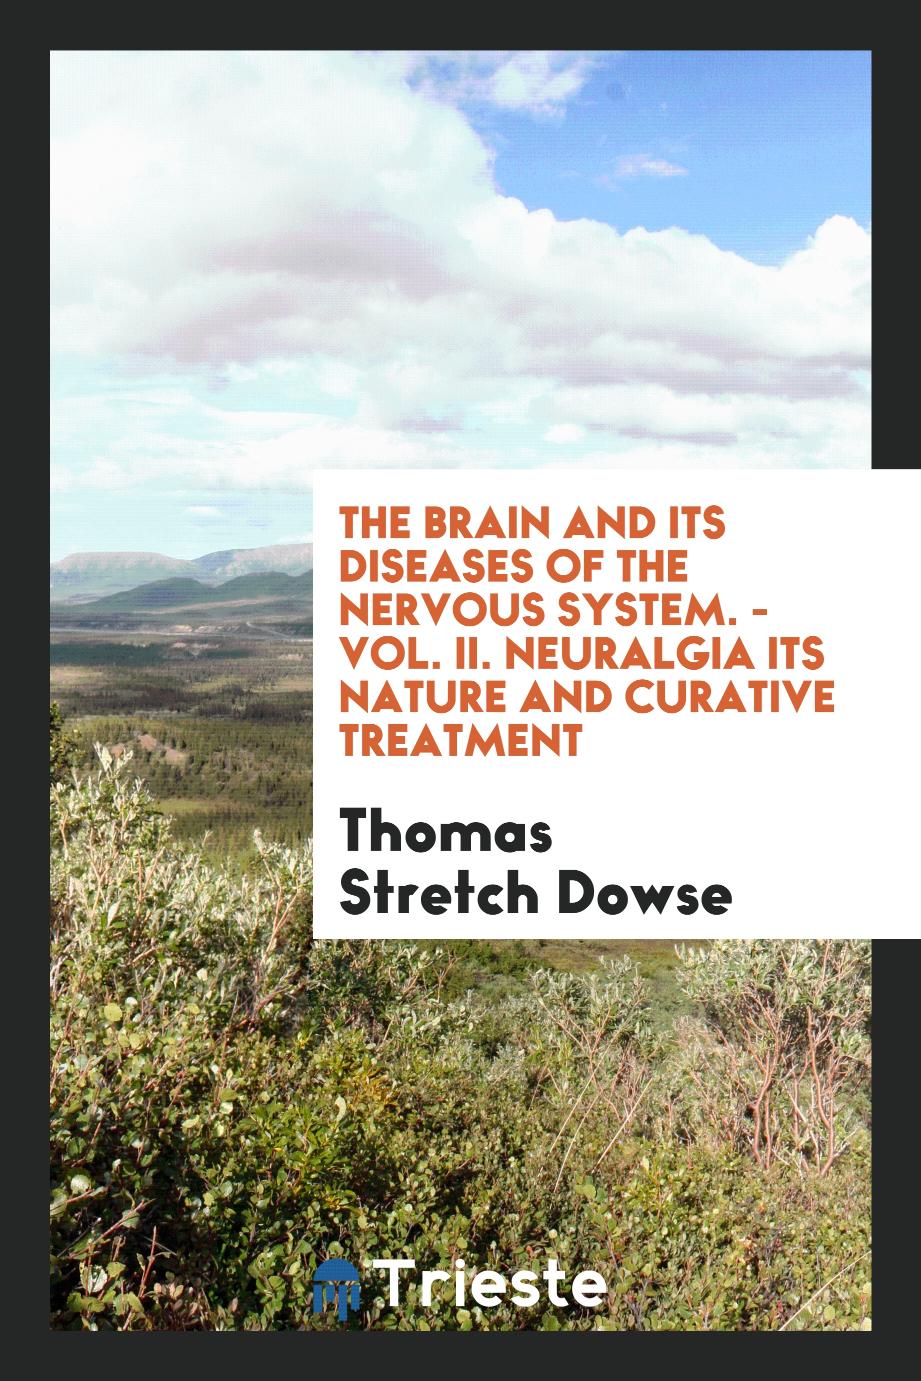 The Brain and Its Diseases of the Nervous System. - Vol. II. Neuralgia Its Nature and Curative Treatment